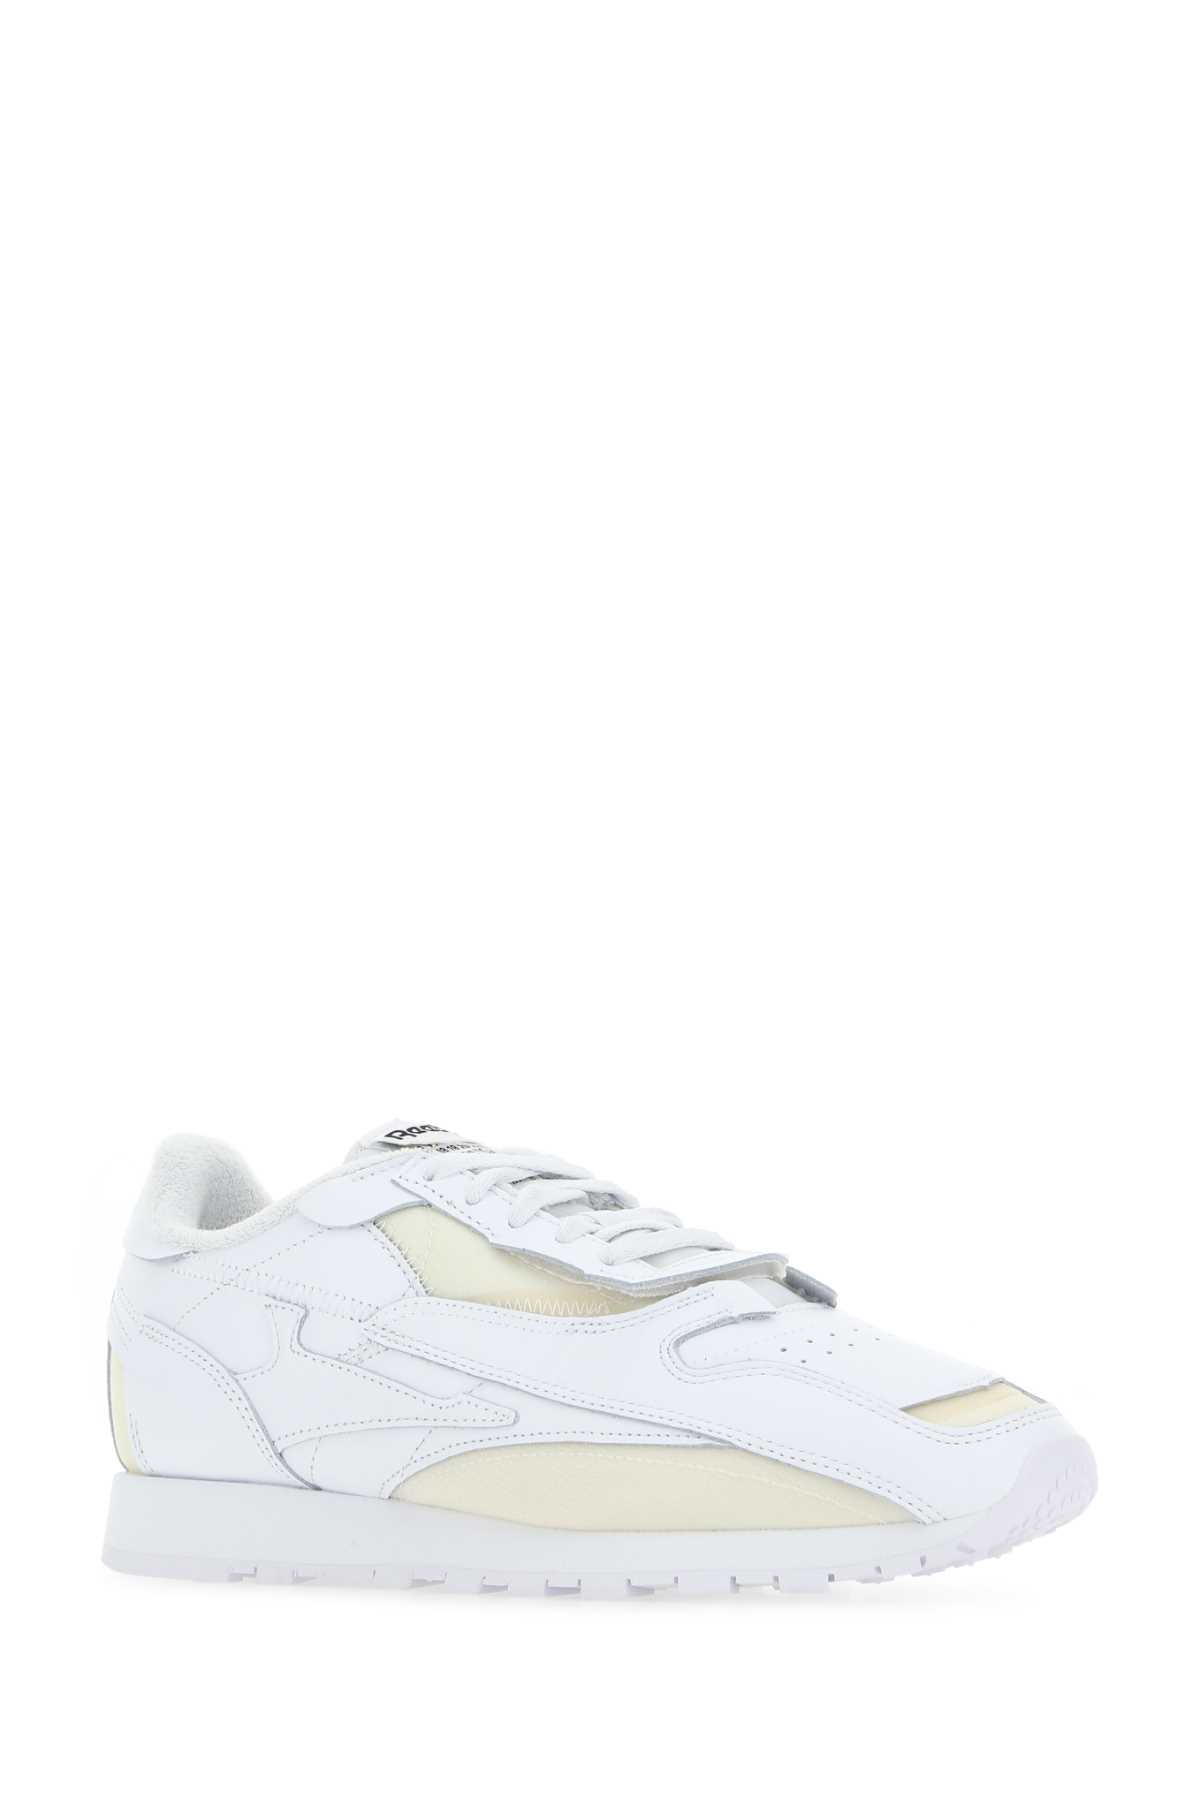 Reebok White Leather And Fabric Project 0 Cl Memory Of V2 Sneakers In T1003